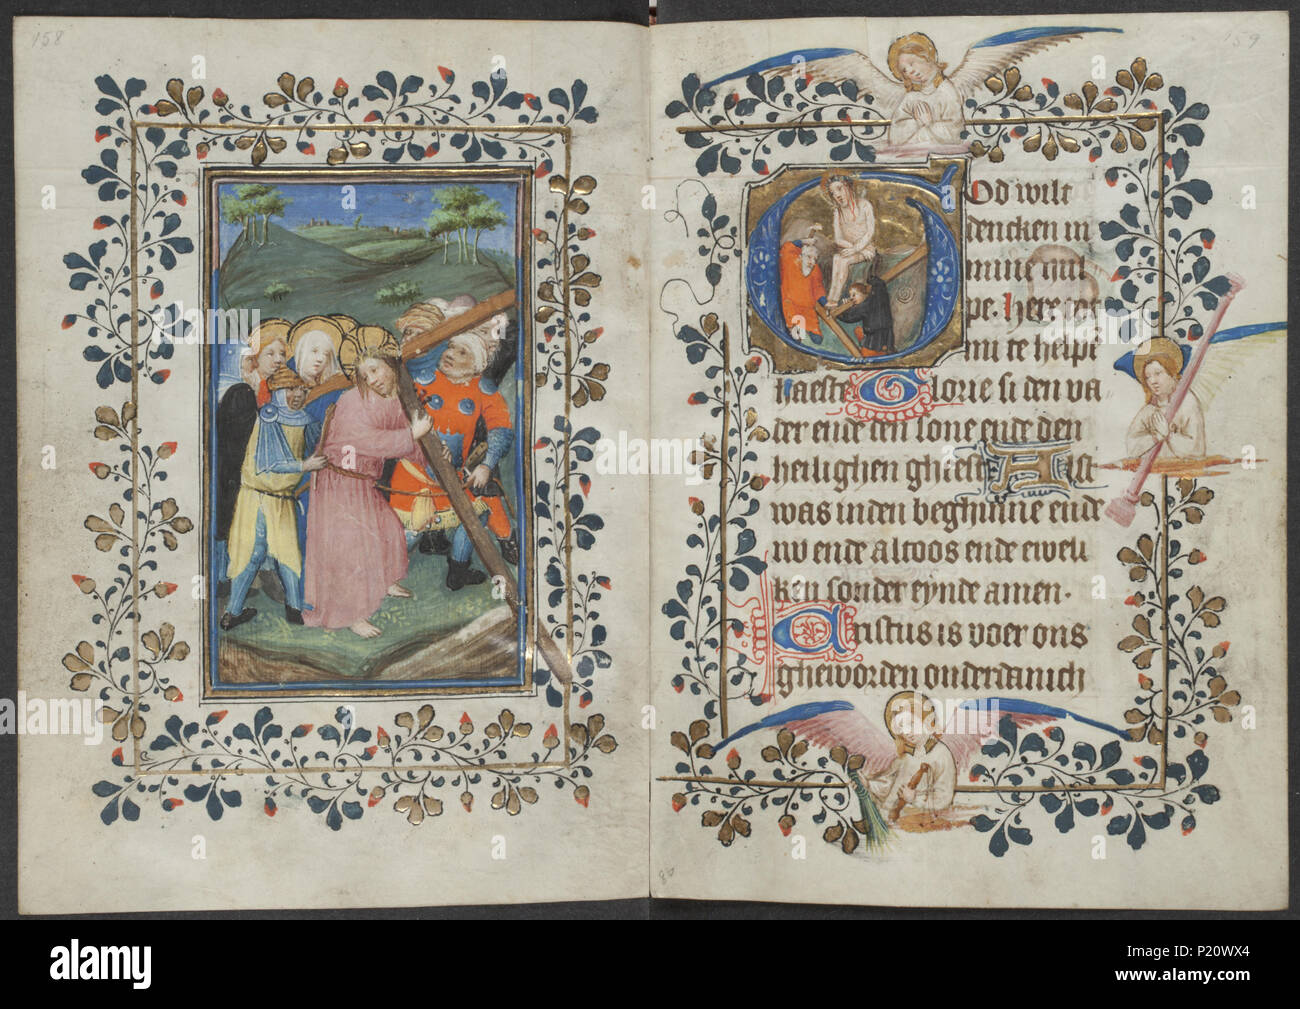 . Book of hours by the Master of Zweder van Culemborg - KB 79 K 2 - folios 079v (left) and 080r (right) .  Lefthand side folio 079v and righthand side folio 080r from the Book of hours by the Master(s) of Zweder van Culemborg Illuminations on the left folio 079v The full-page miniature shows The carrying of the cross: Christ bears the cross The apostle john the evangelist; possible attributes: book, cauldron, chalice with snake, eagle, palm, scroll - non-miraculous activities and events  male saint (11H(JOHN)4) Carrying of the cross: christ bearing the cross, alone or with the help of others  Stock Photo